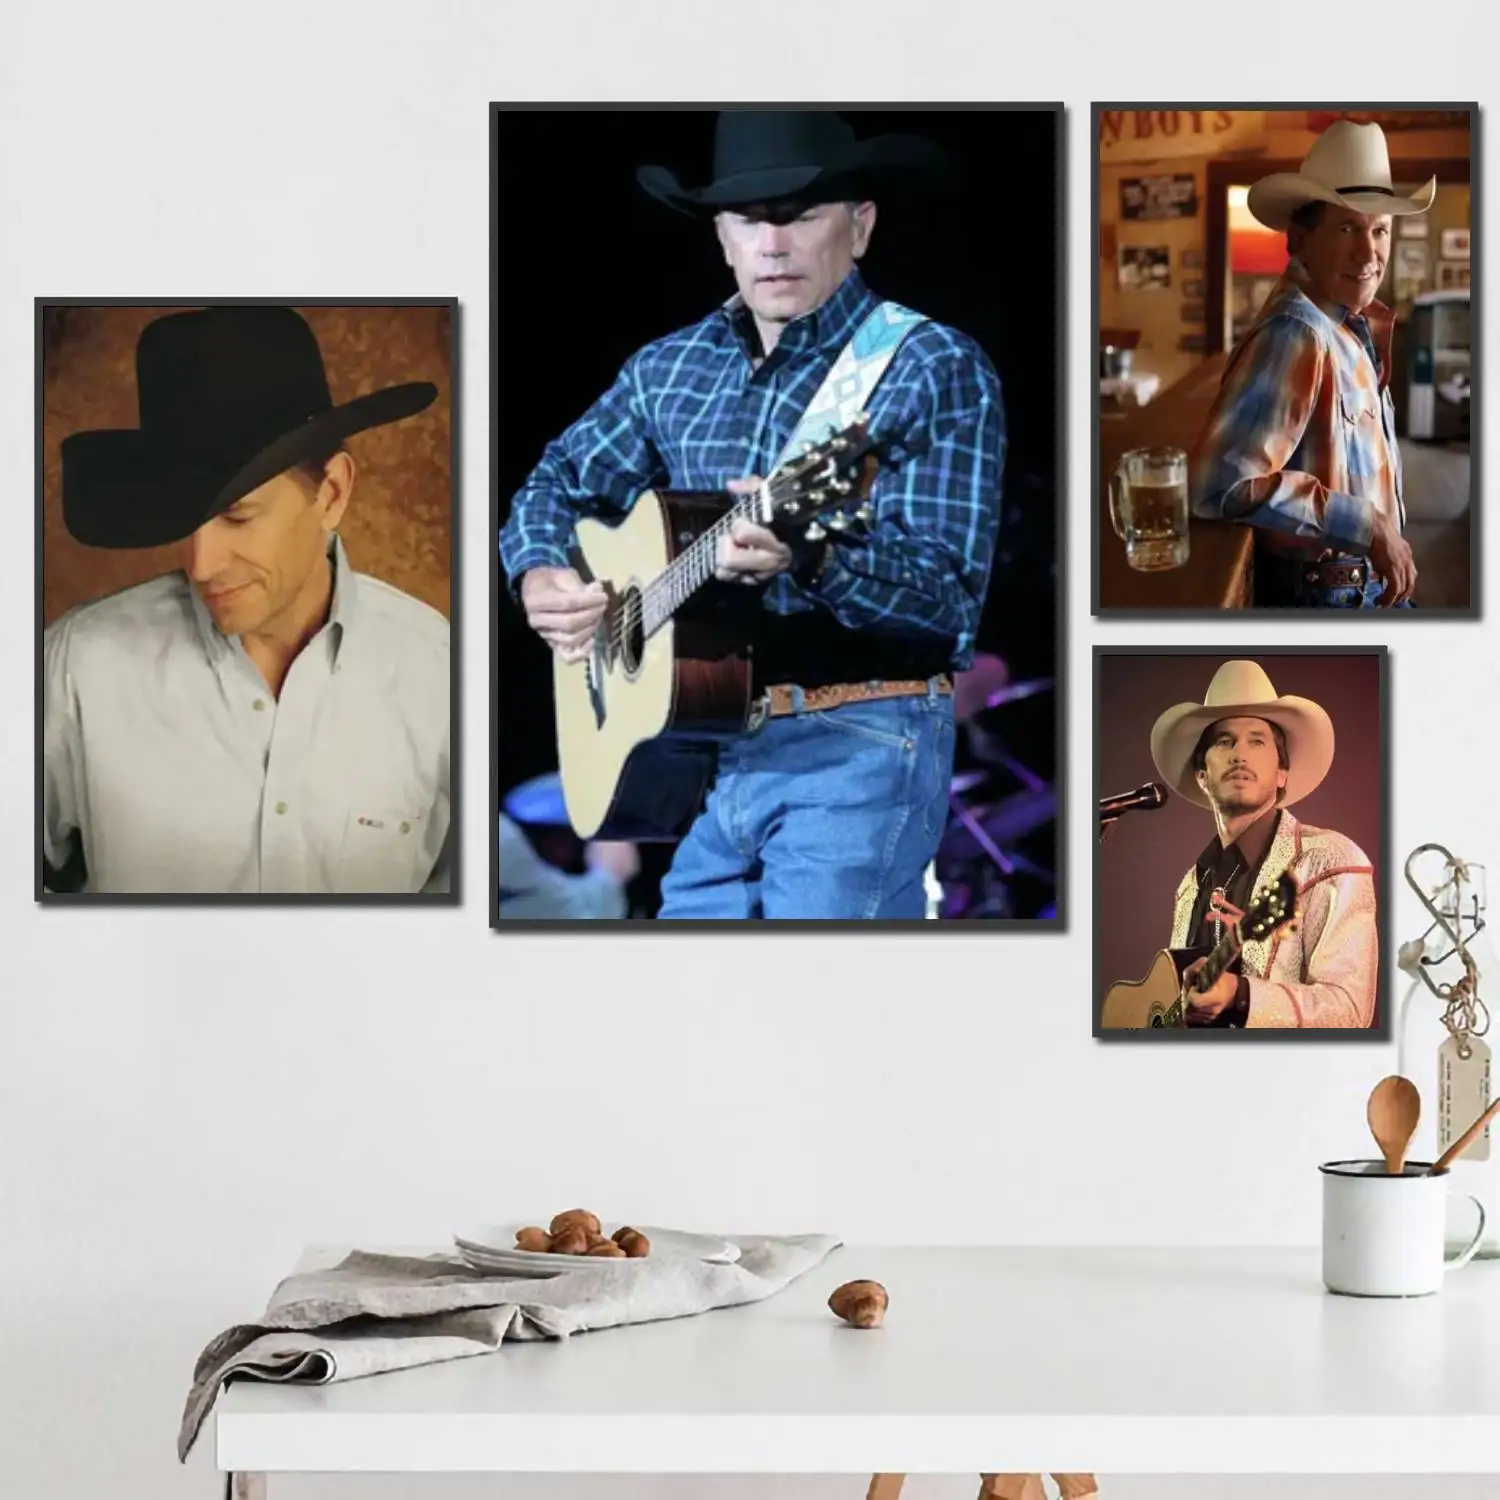 

george strait singer 24x36 Decorative Canvas Posters Room Bar Cafe Decor Gift Print Art Wall Paintings